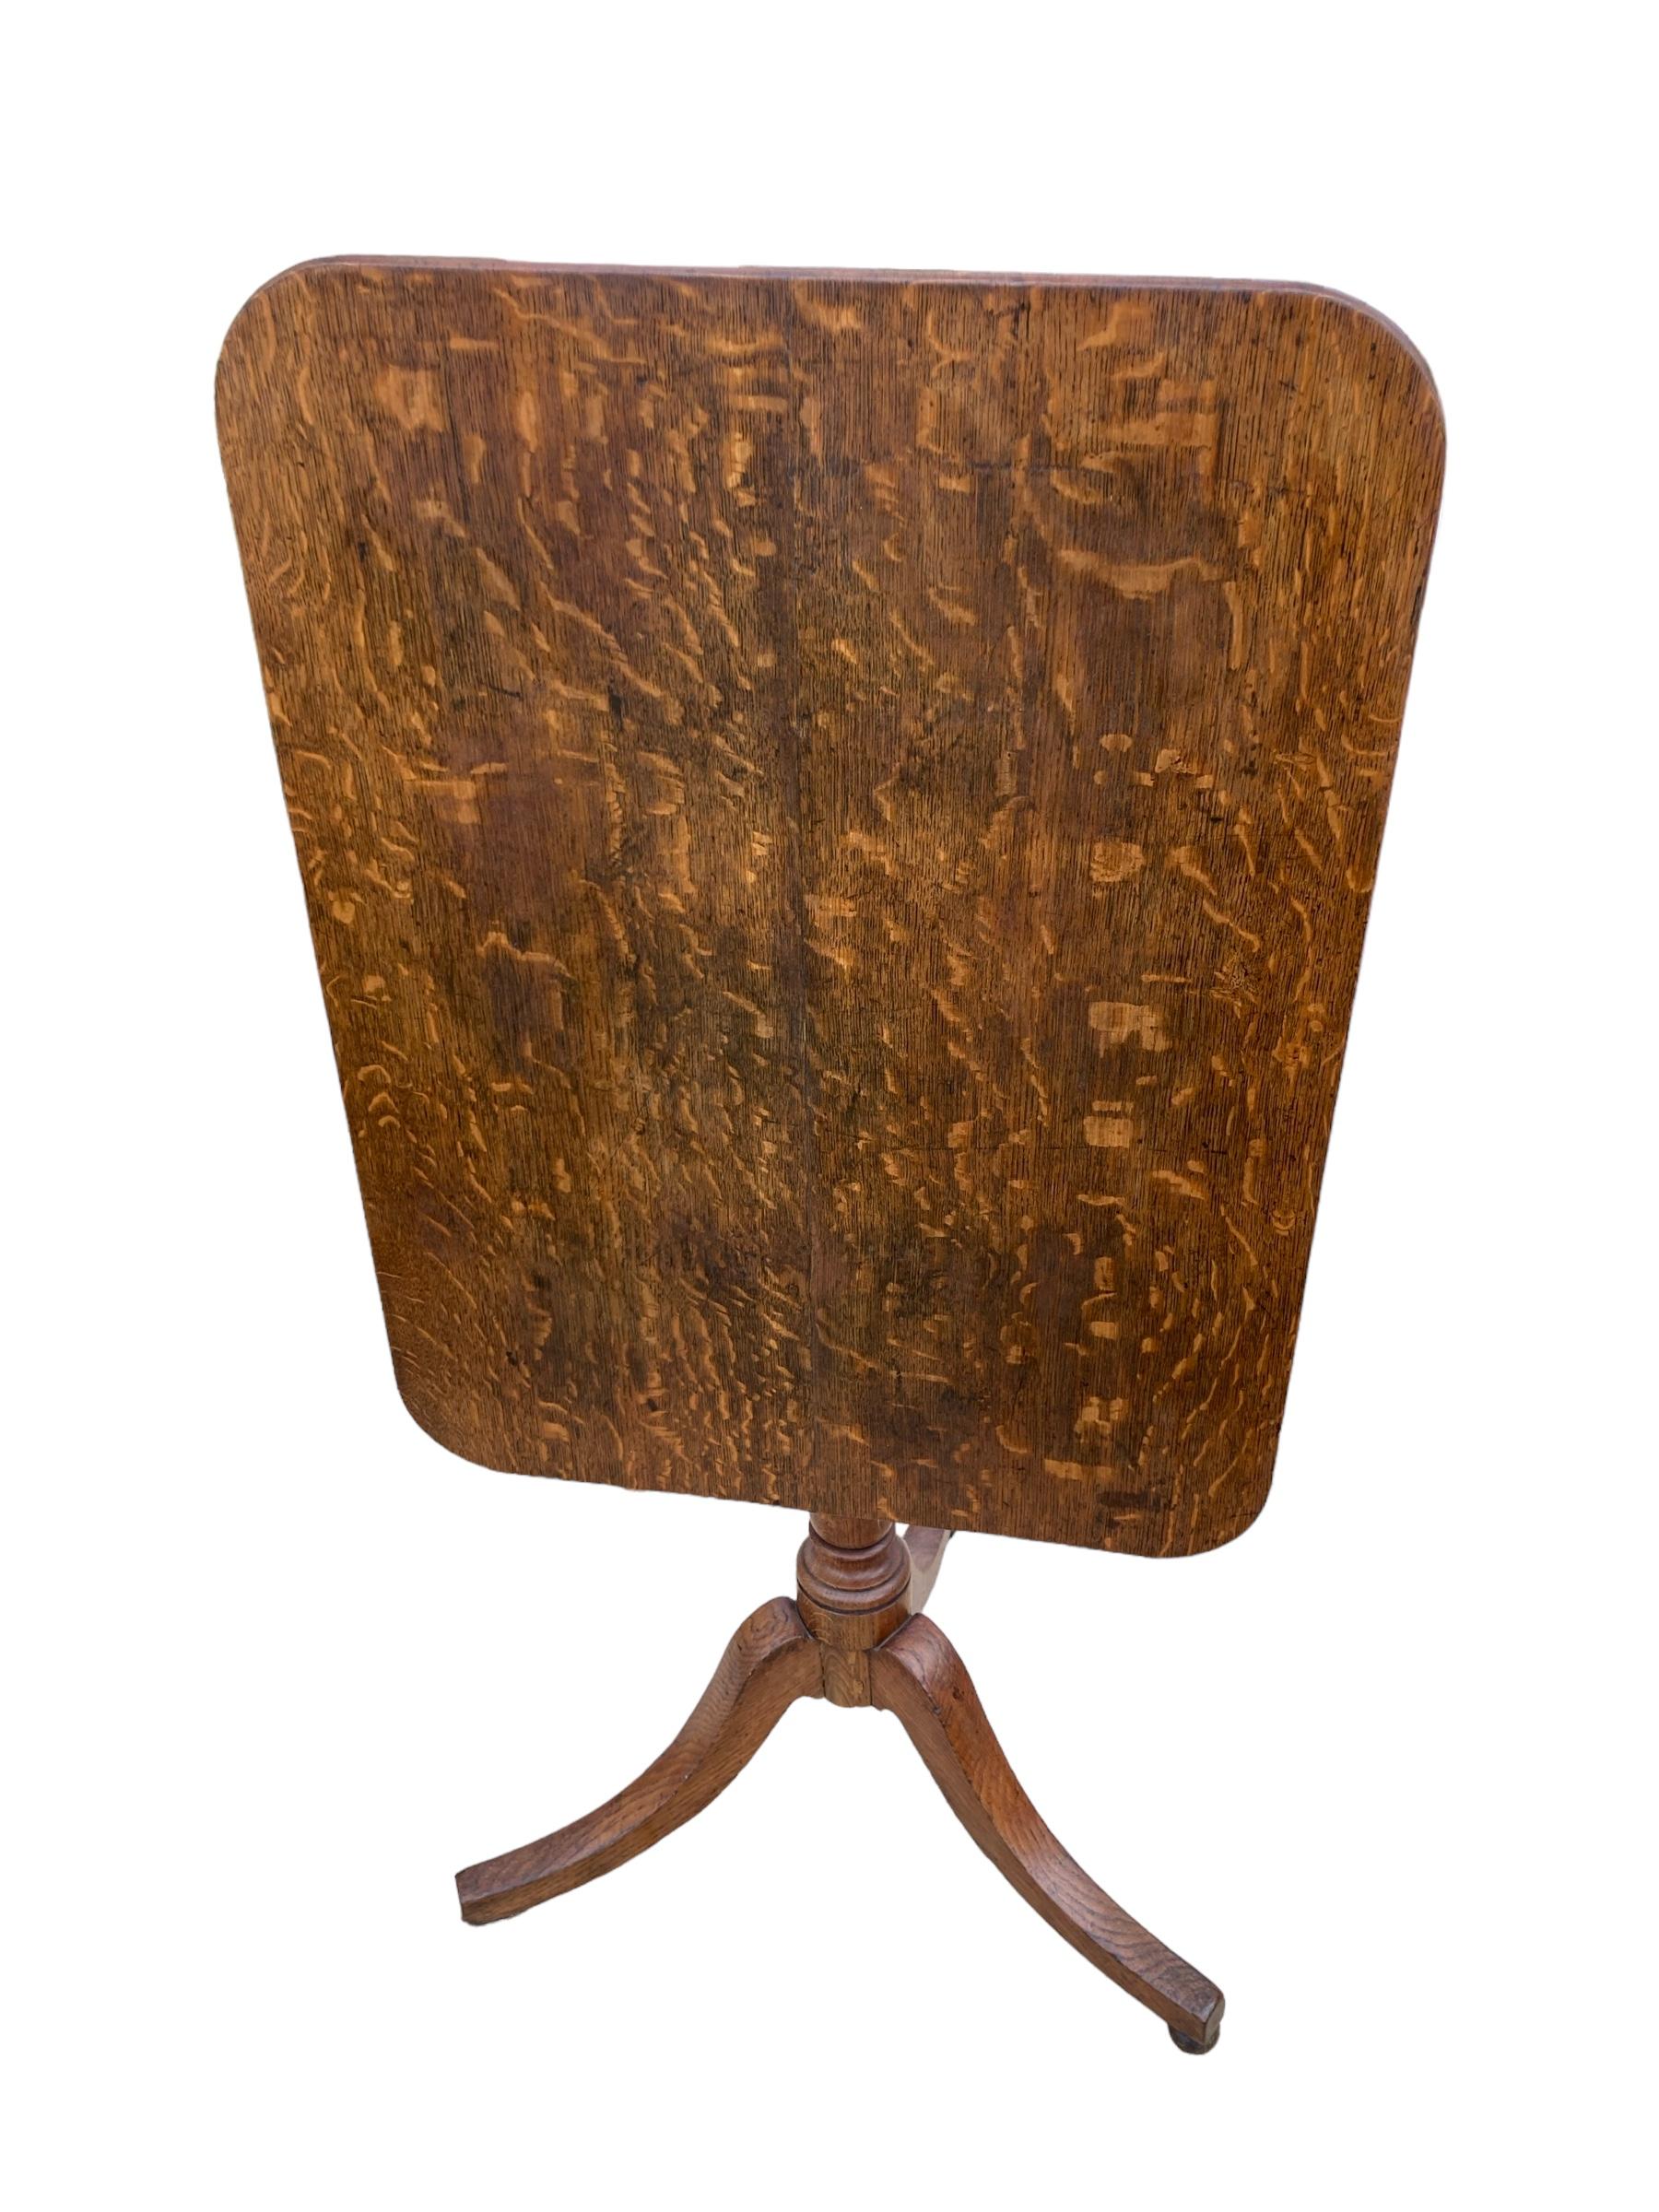 An Original 19th Century English Oak Rectangular Tri Legged Tilt top table. Beautifully crafted wooden top, adding a touch of elegance to any room. The intricate details and sturdy construction make it a timeless piece that will last for generations